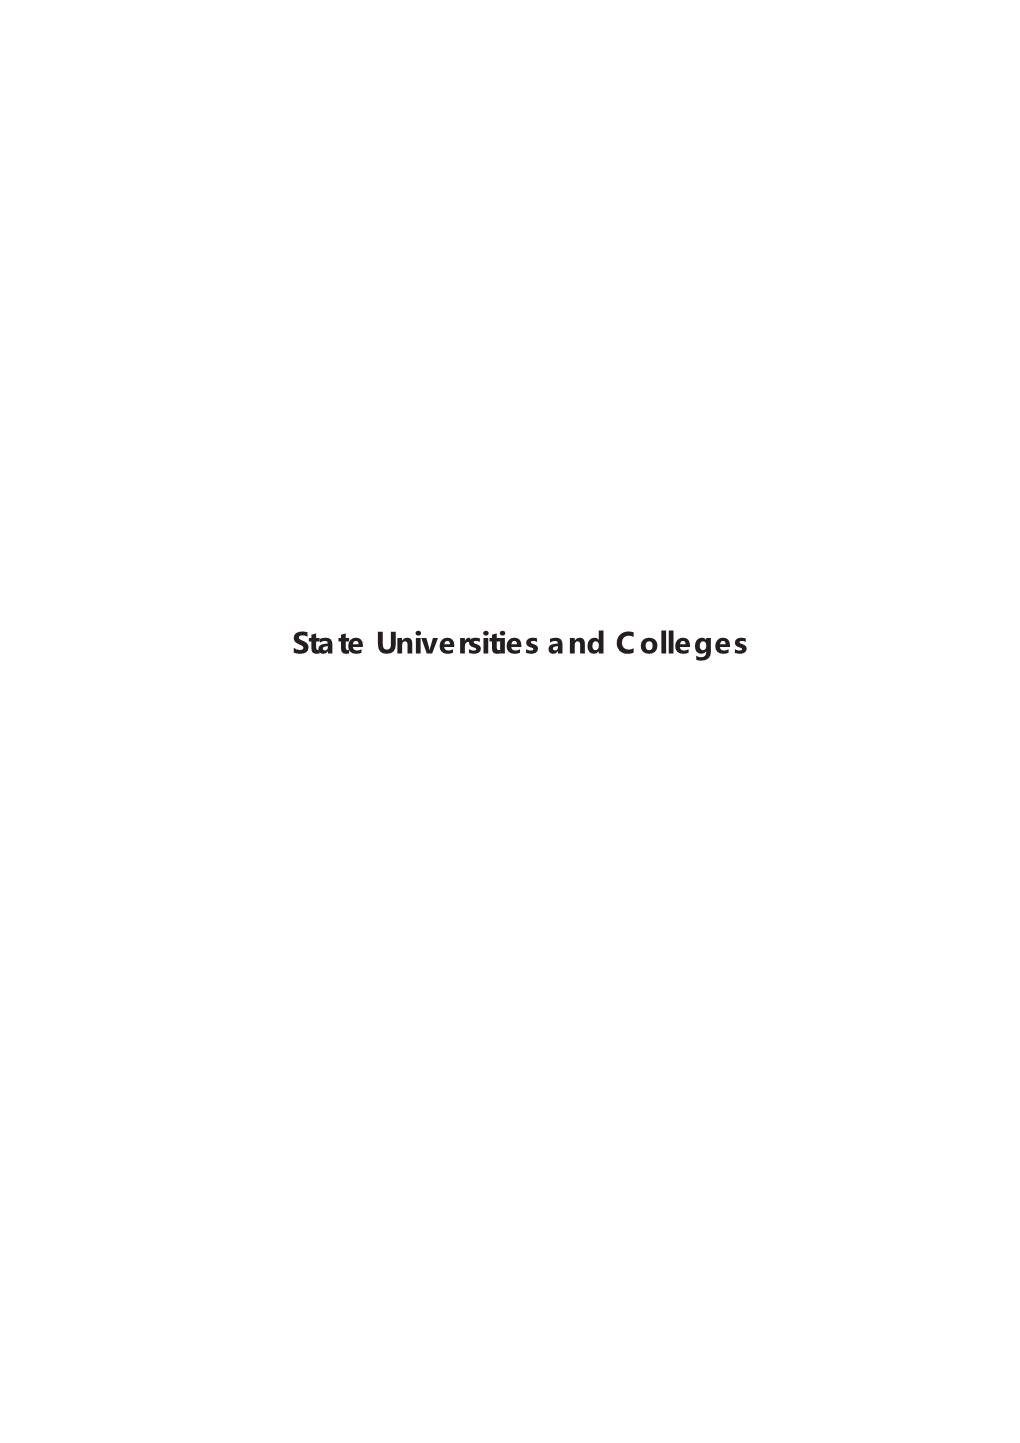 State Universities and Colleges STATE UNIVERSITIES and COLLEGES